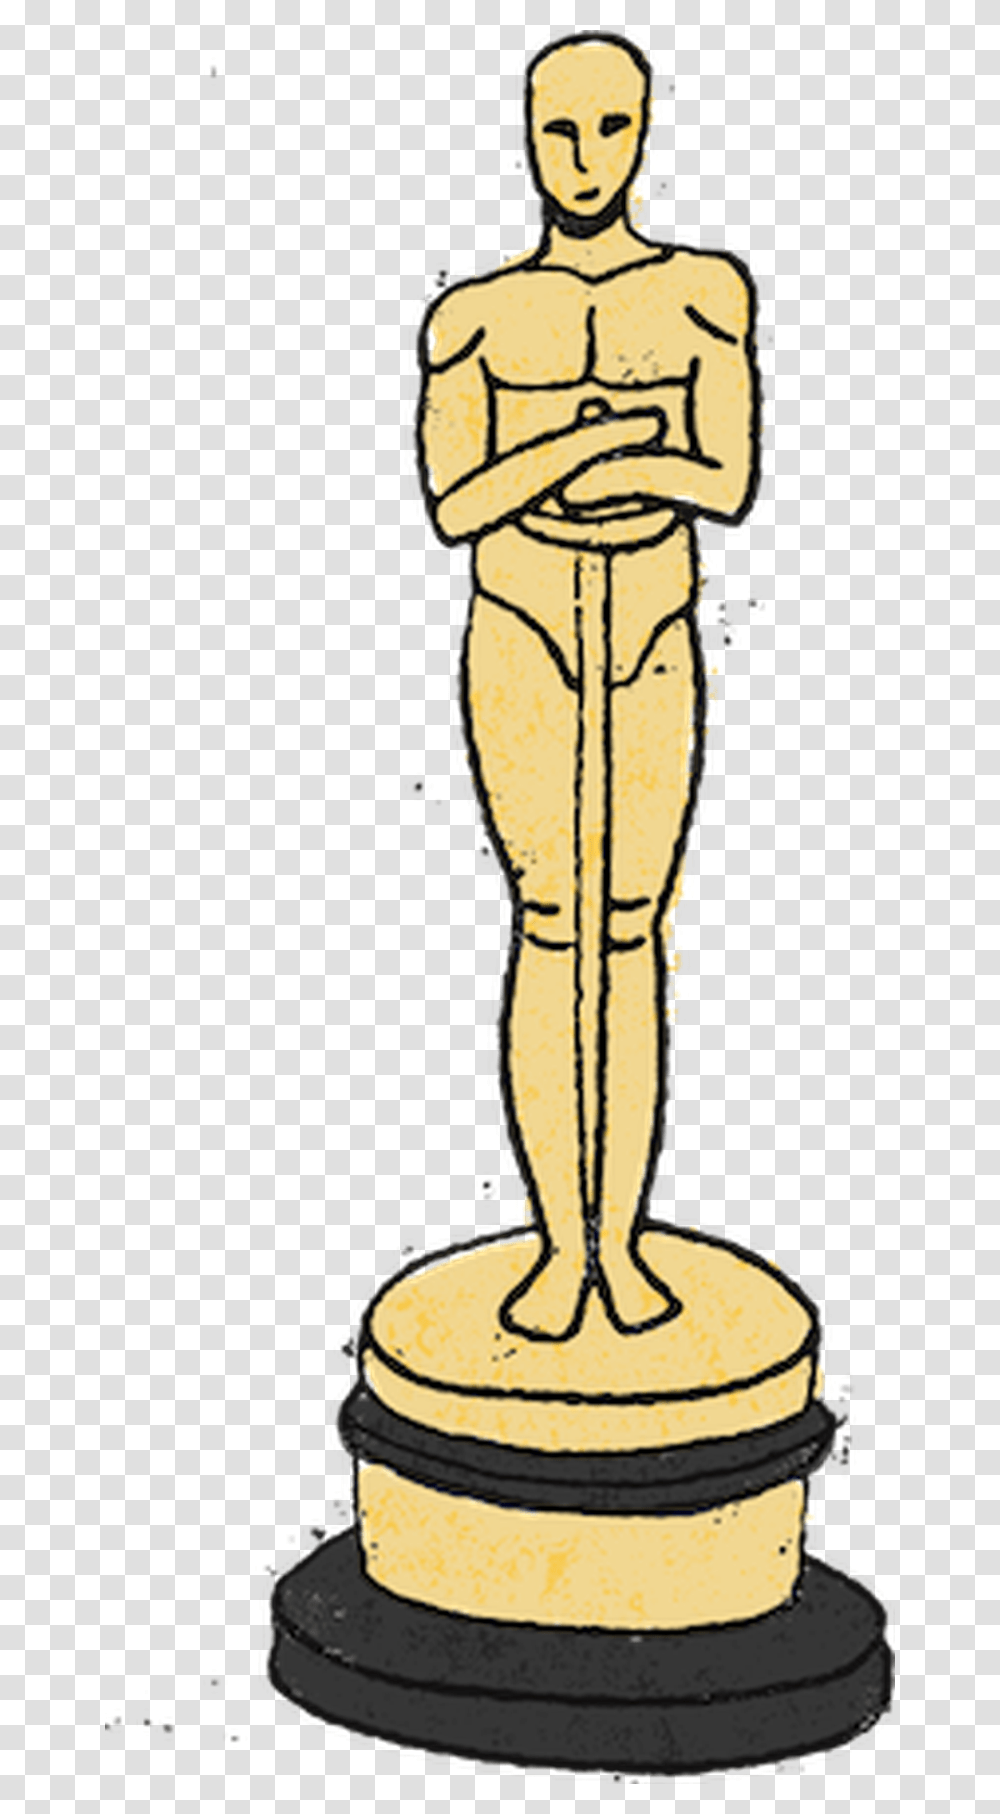 Everything Youd Ever Need To Know About The Oscars, Wedding Cake, Dessert, Food, Crucifix Transparent Png